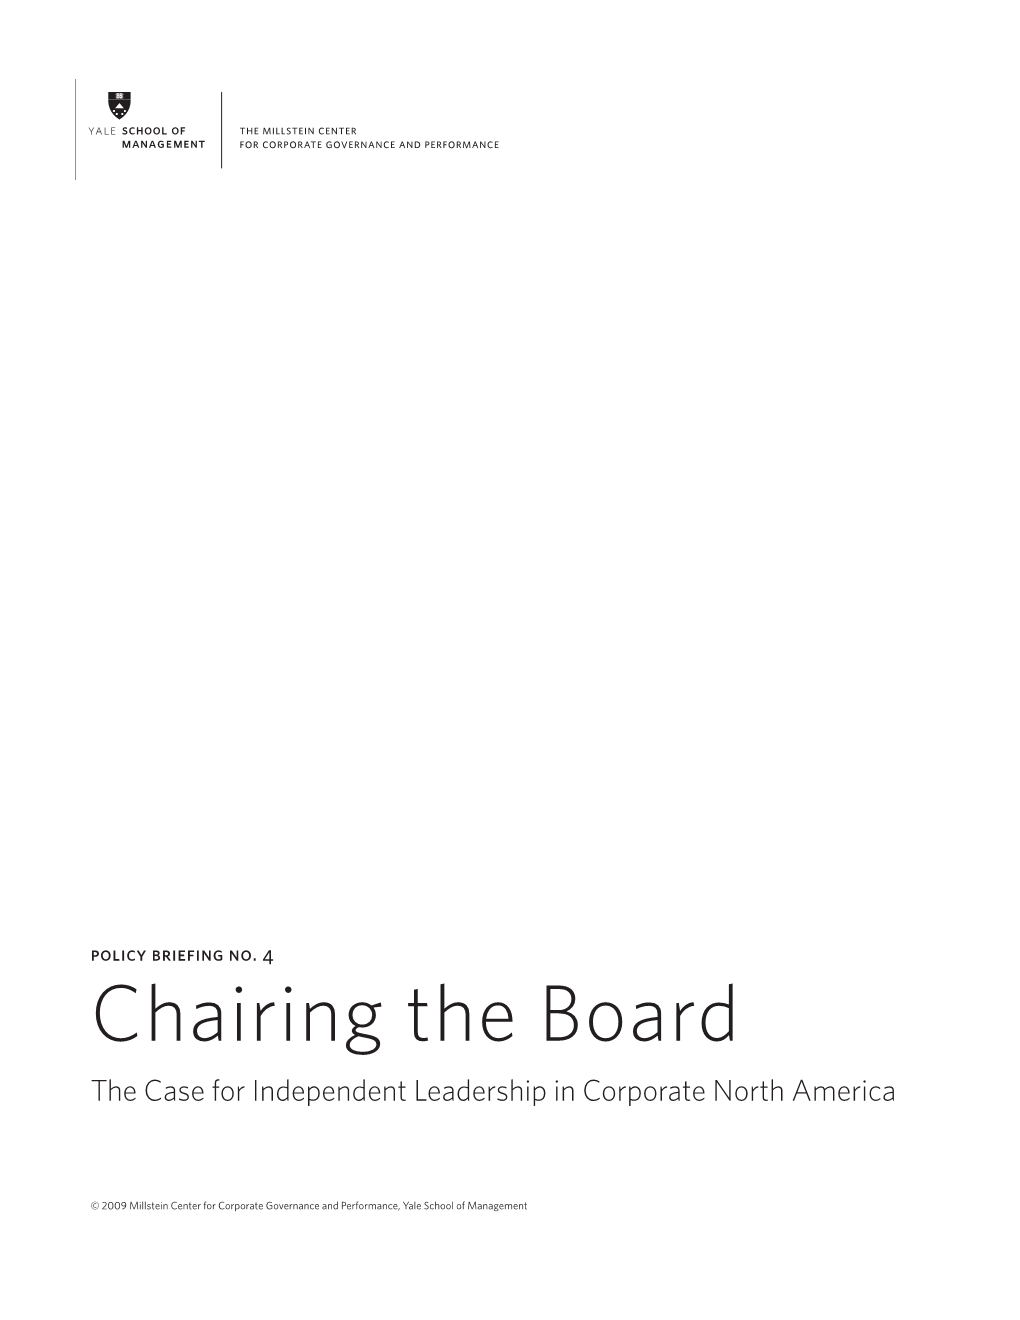 Chairing the Board the Case for Independent Leadership in Corporate North America